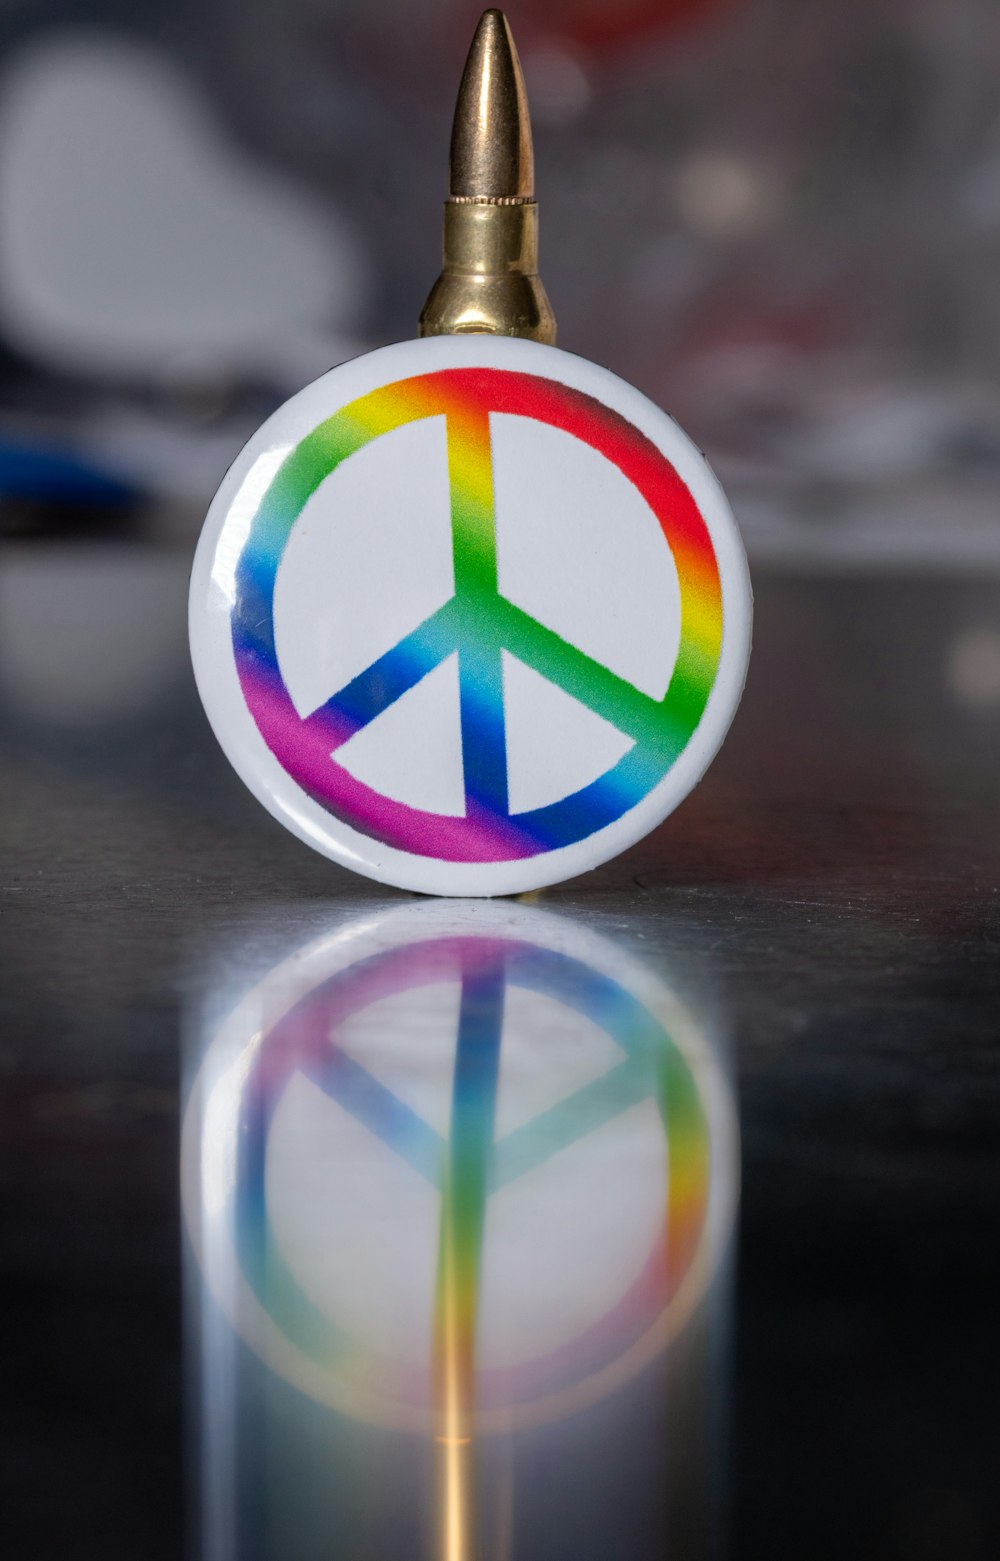 a peace sign is shown on a table